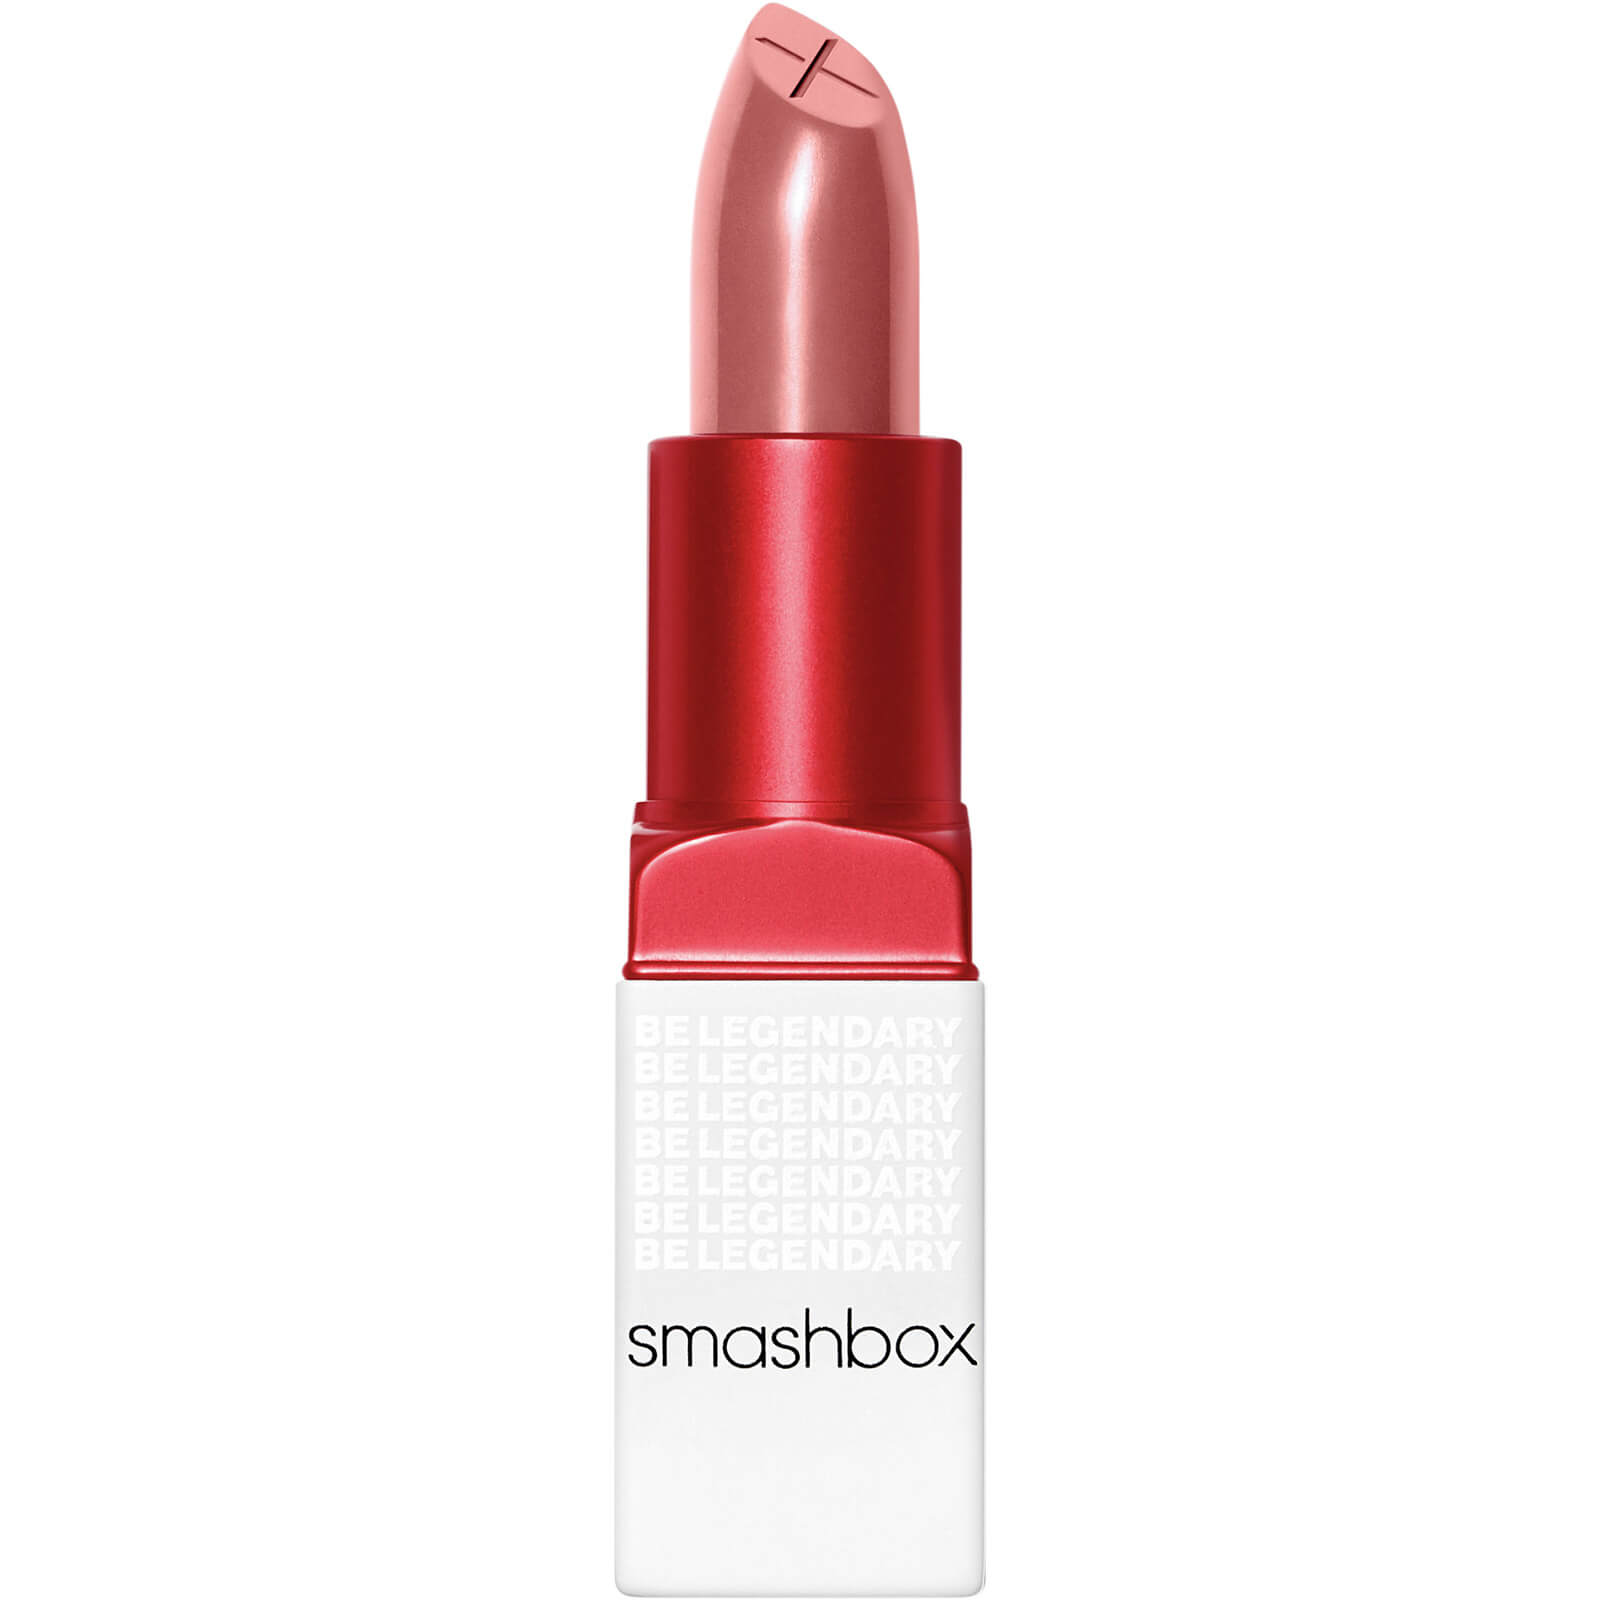 Smashbox Be Legendary Prime and Plush Lipstick 3.4g (Various Shades) - Nude Pink